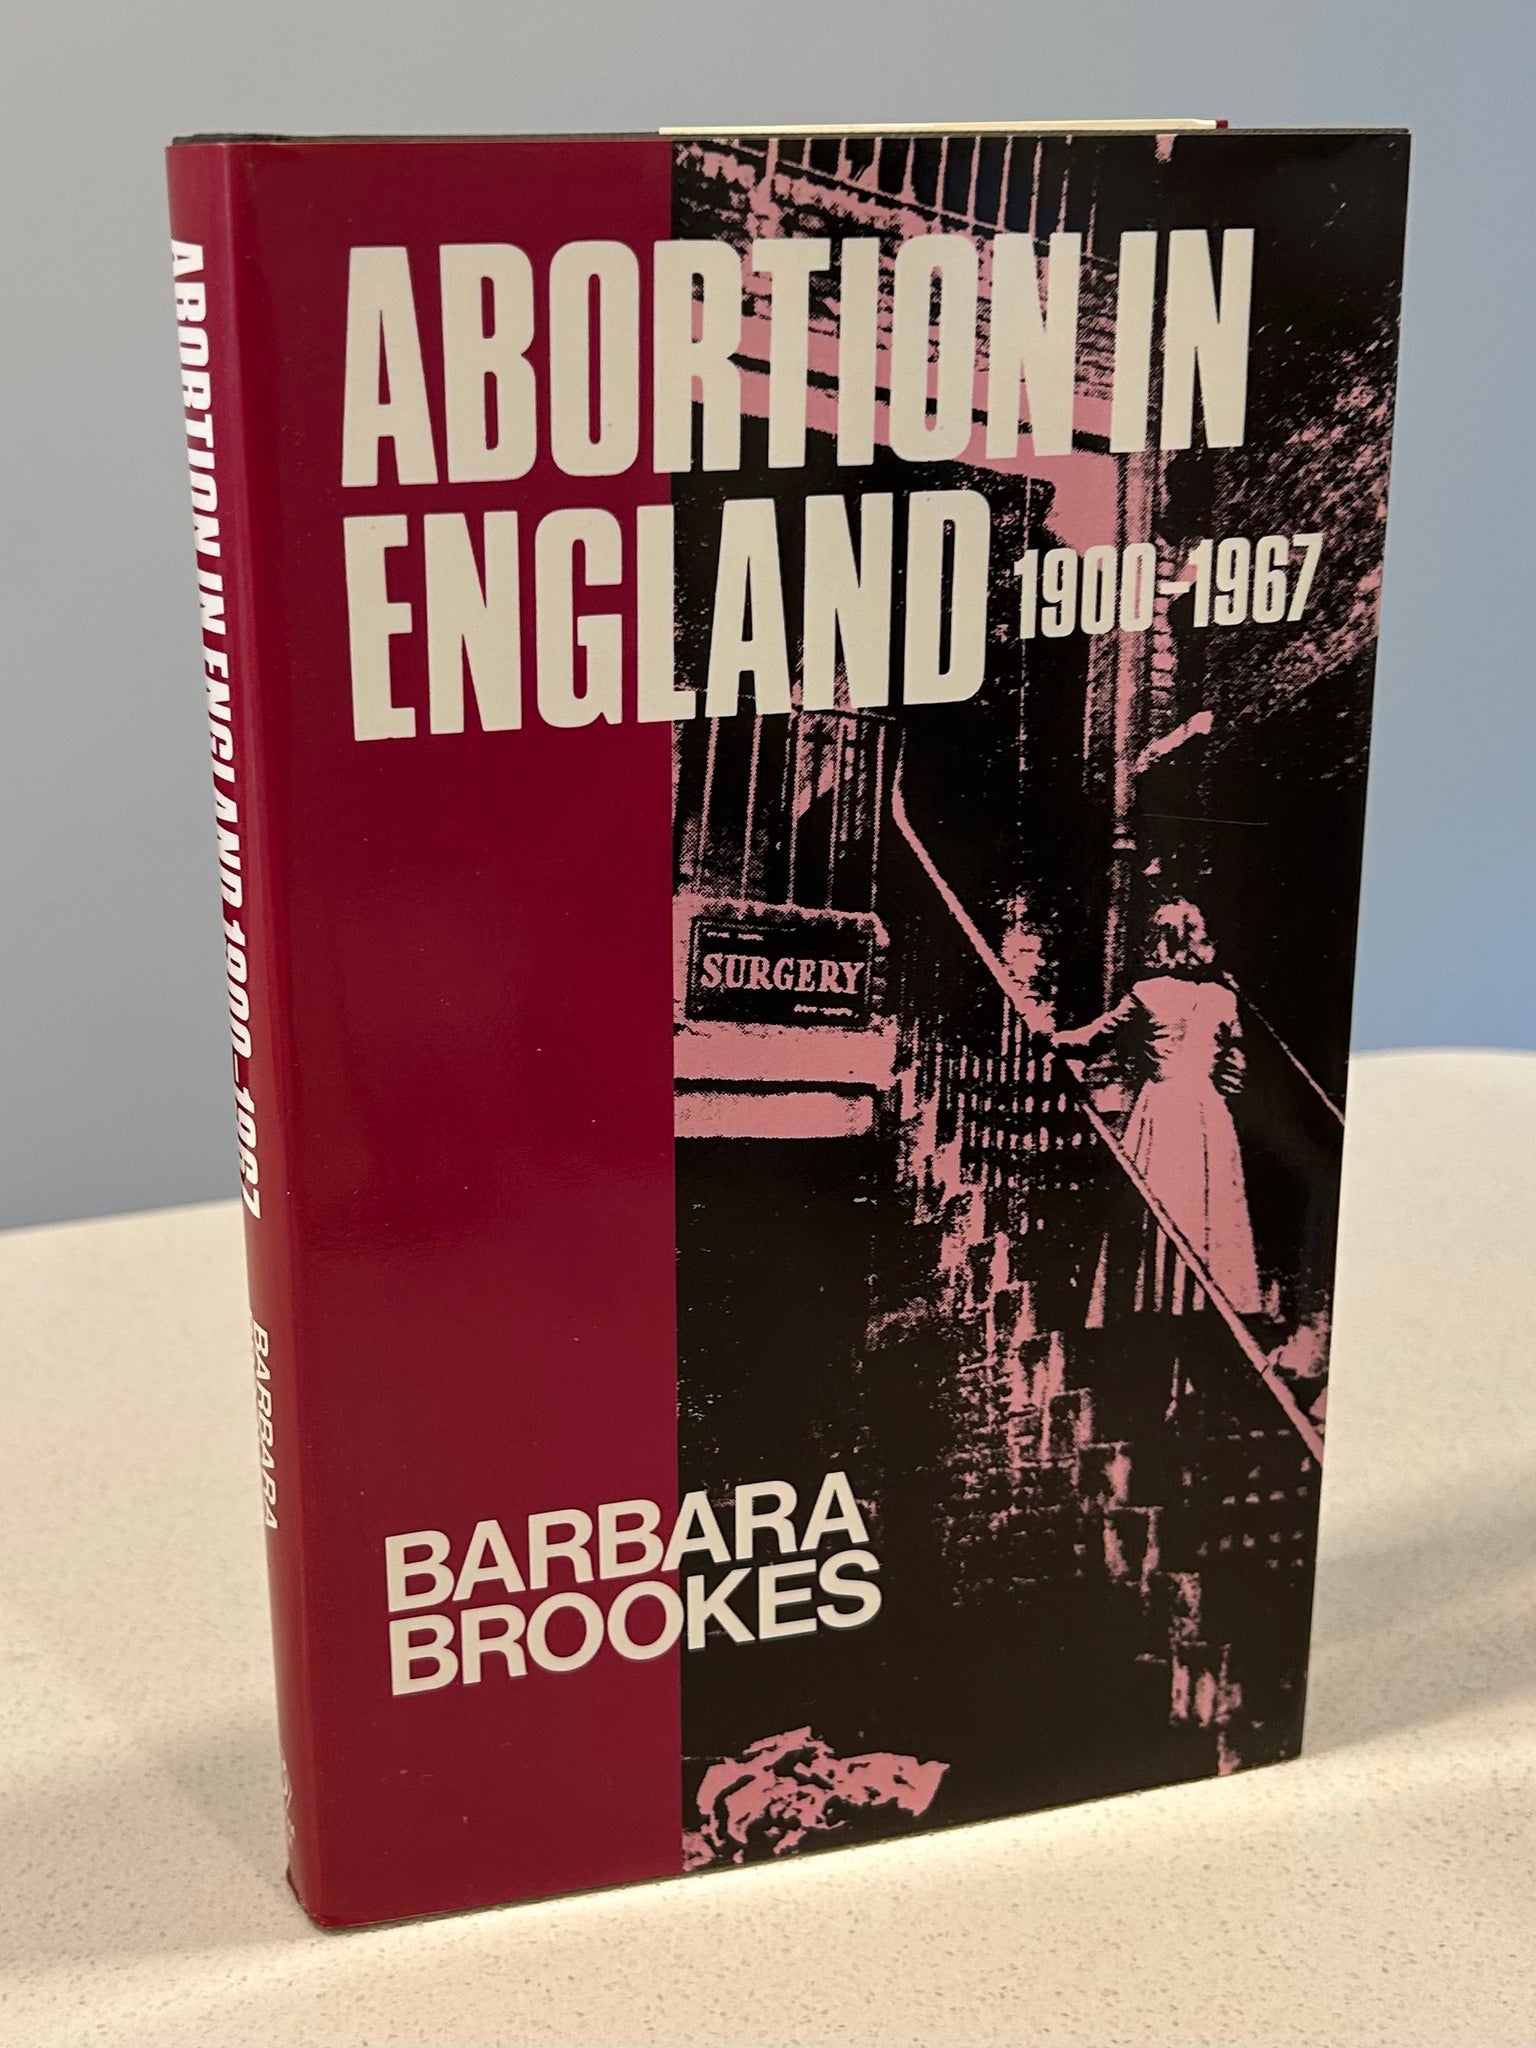 Abortion in England 1900 - 1967